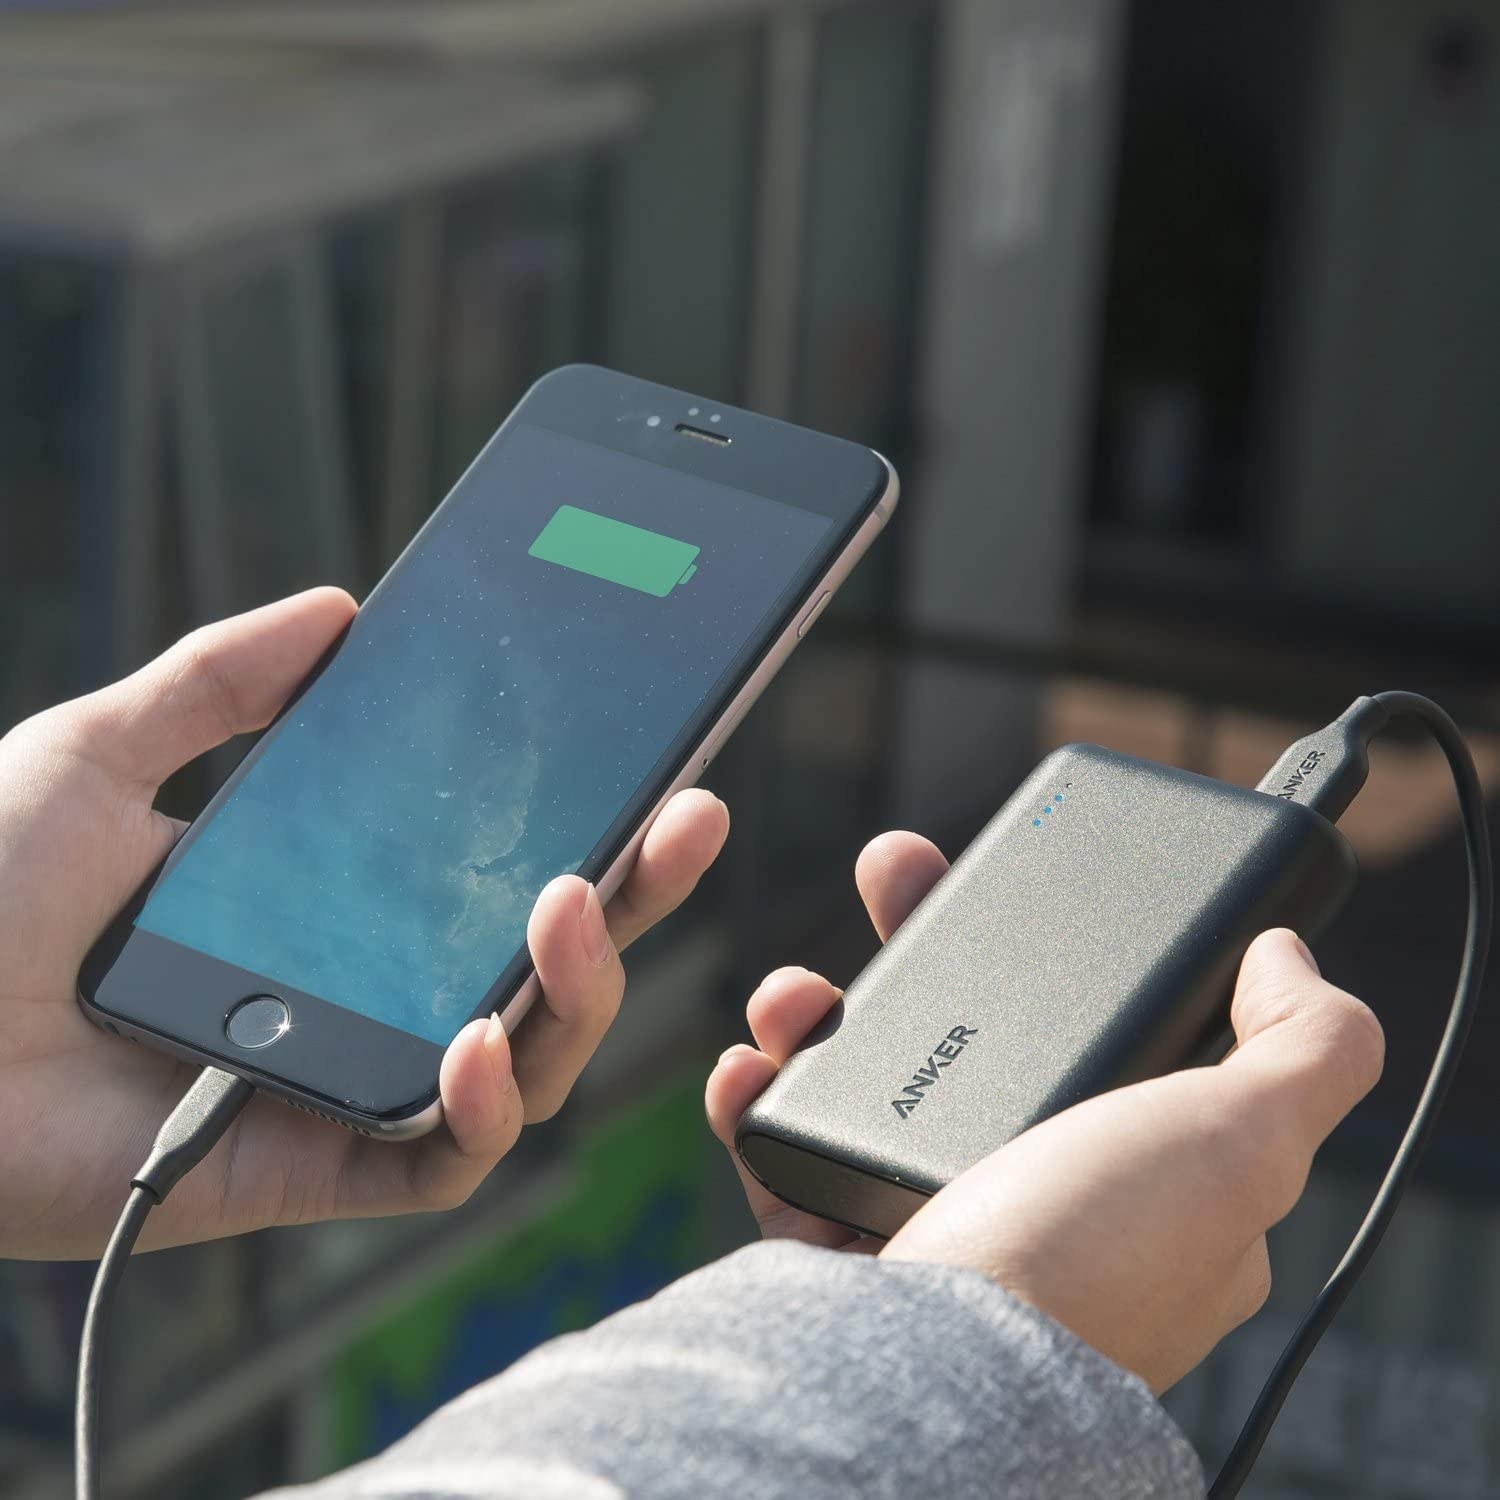 Two hands holding a smartphone being charged by a portable charging device via USB cable